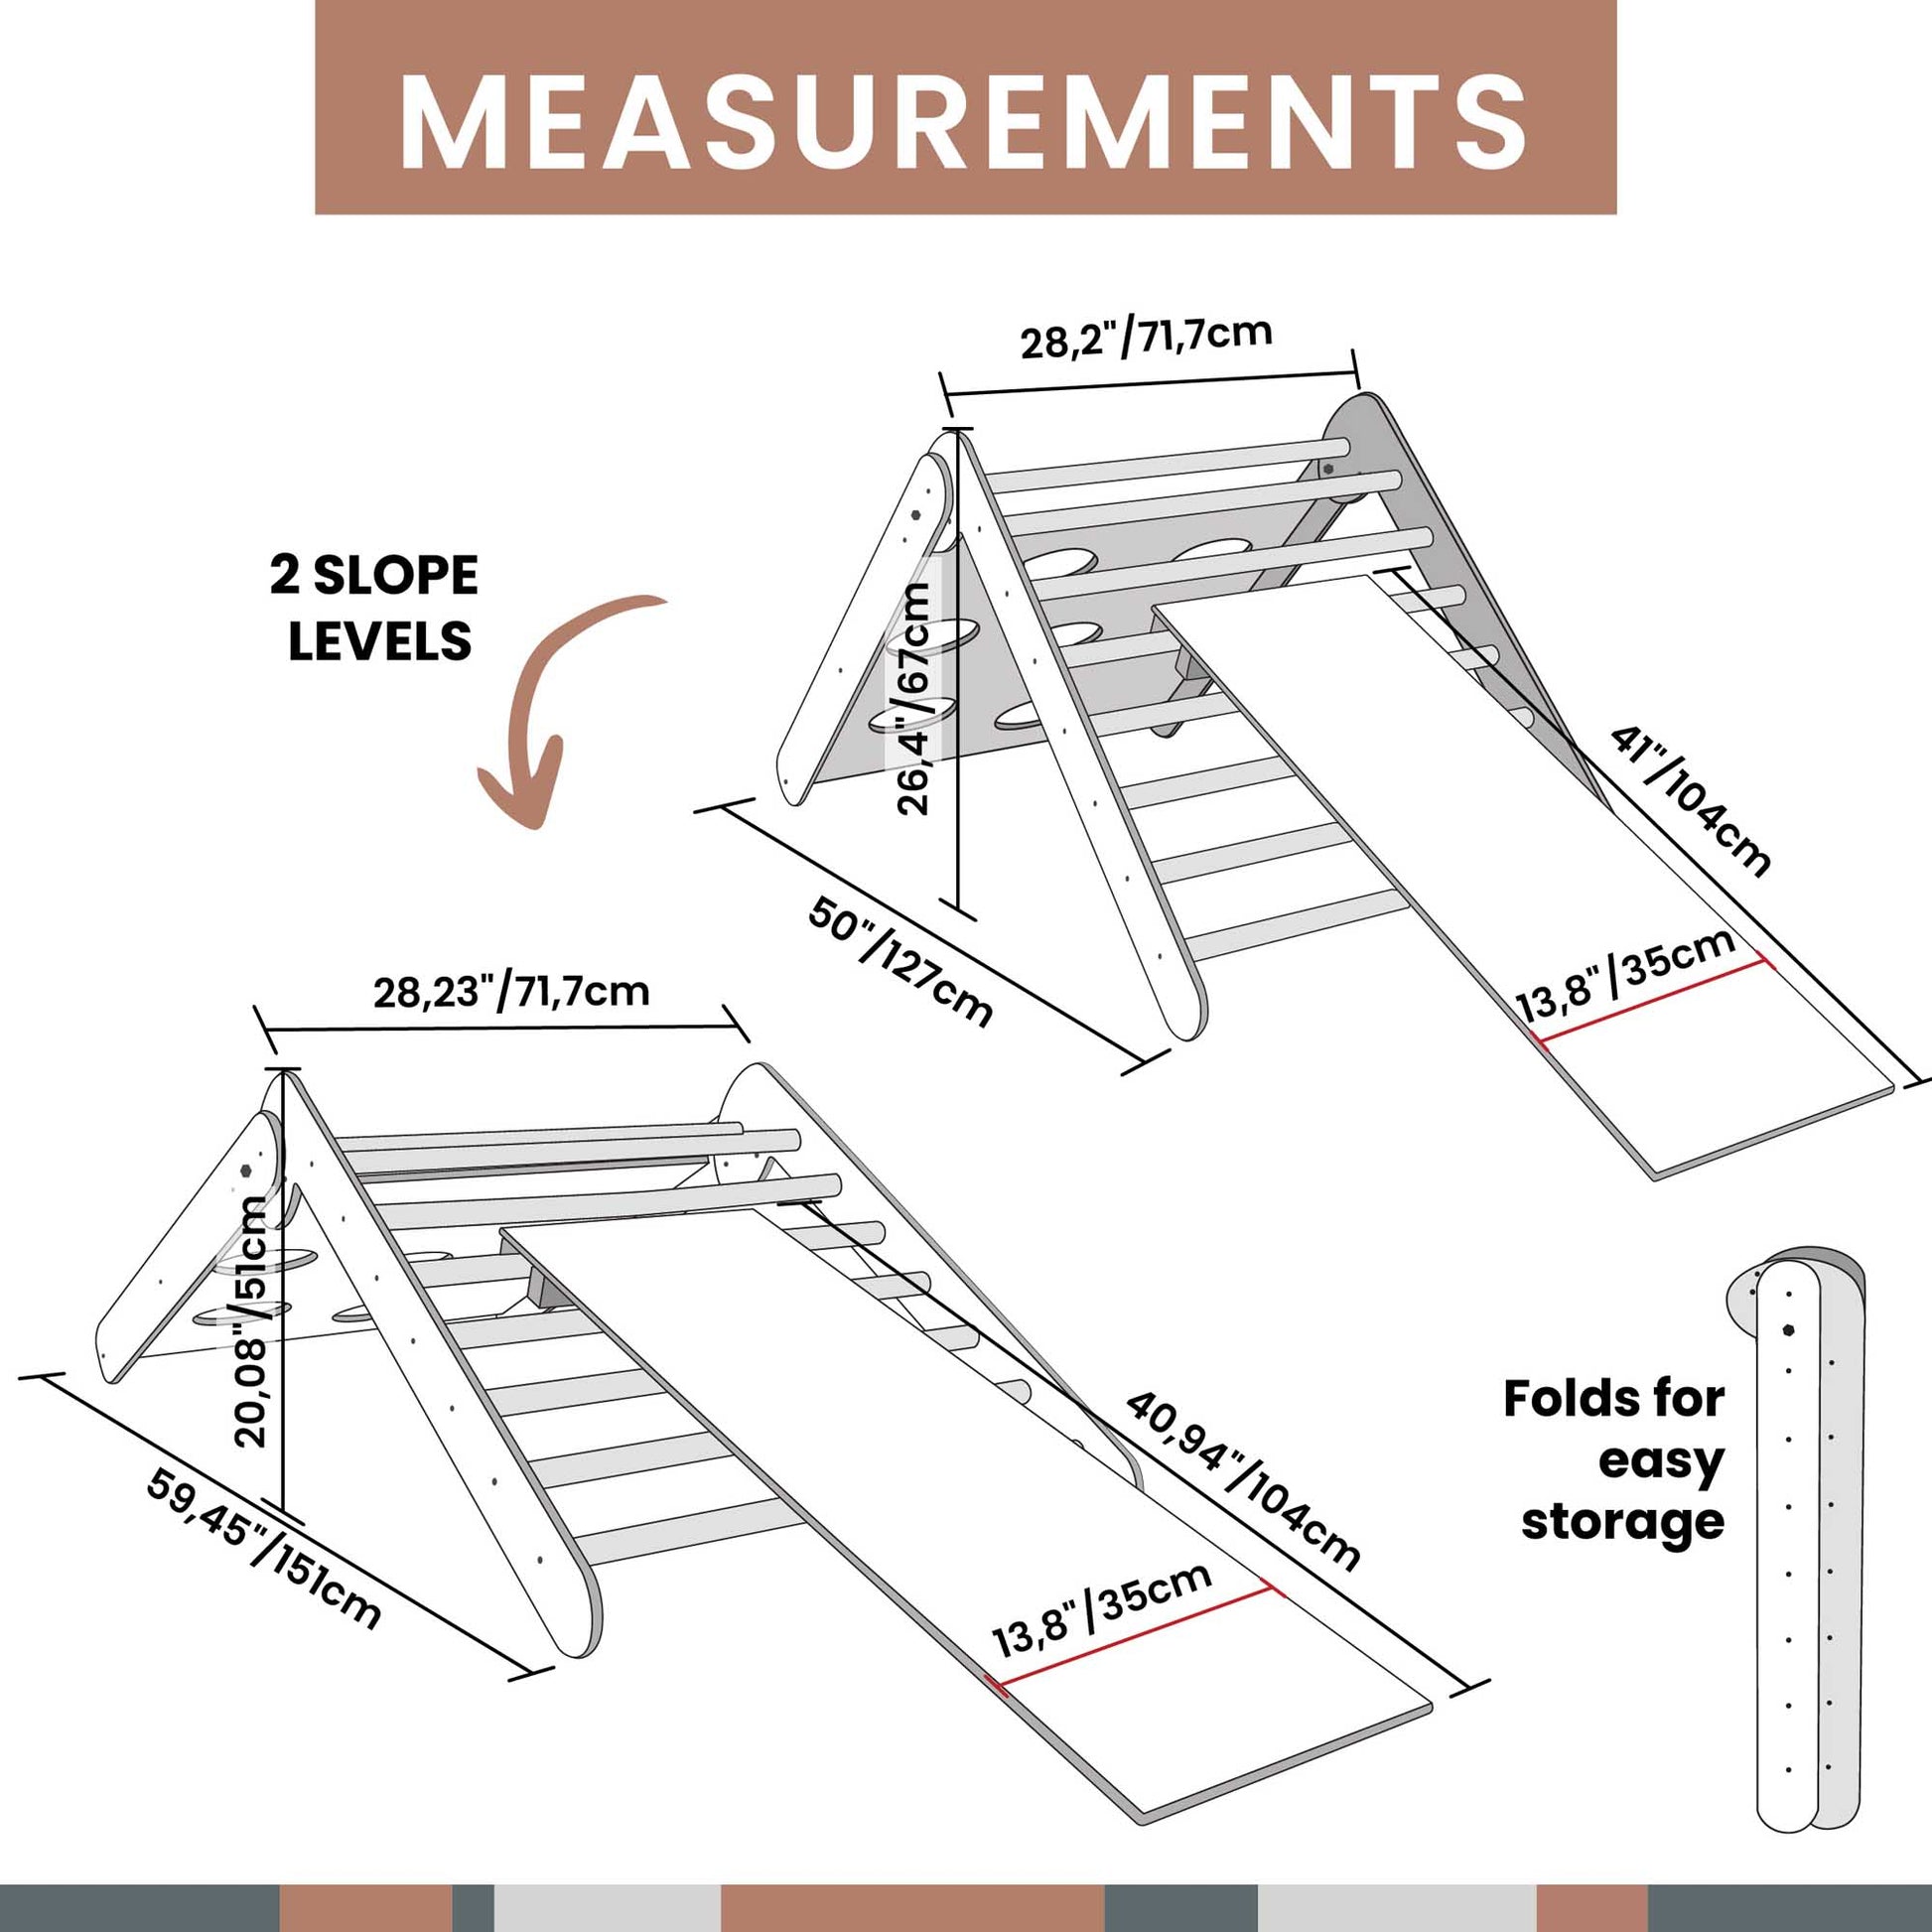 A transformable climbing triangle with 2 sensory panels diagram displaying the measurements of a wooden slide as part of a Montessori activity set.